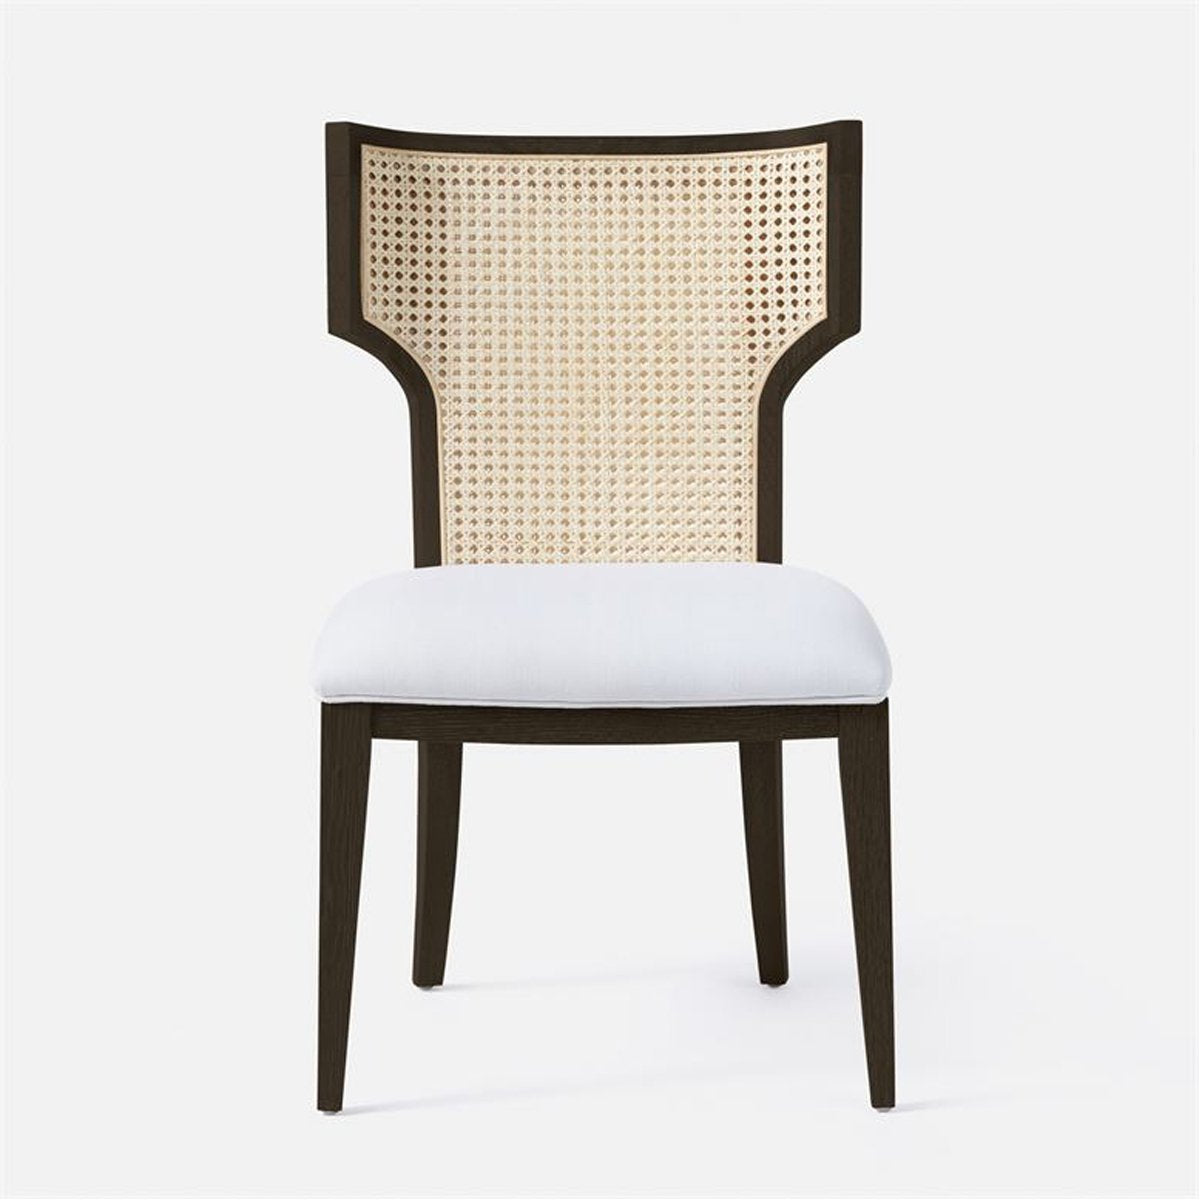 Made Goods Carleen Wingback Cane Dining Chair in Kern Fabric